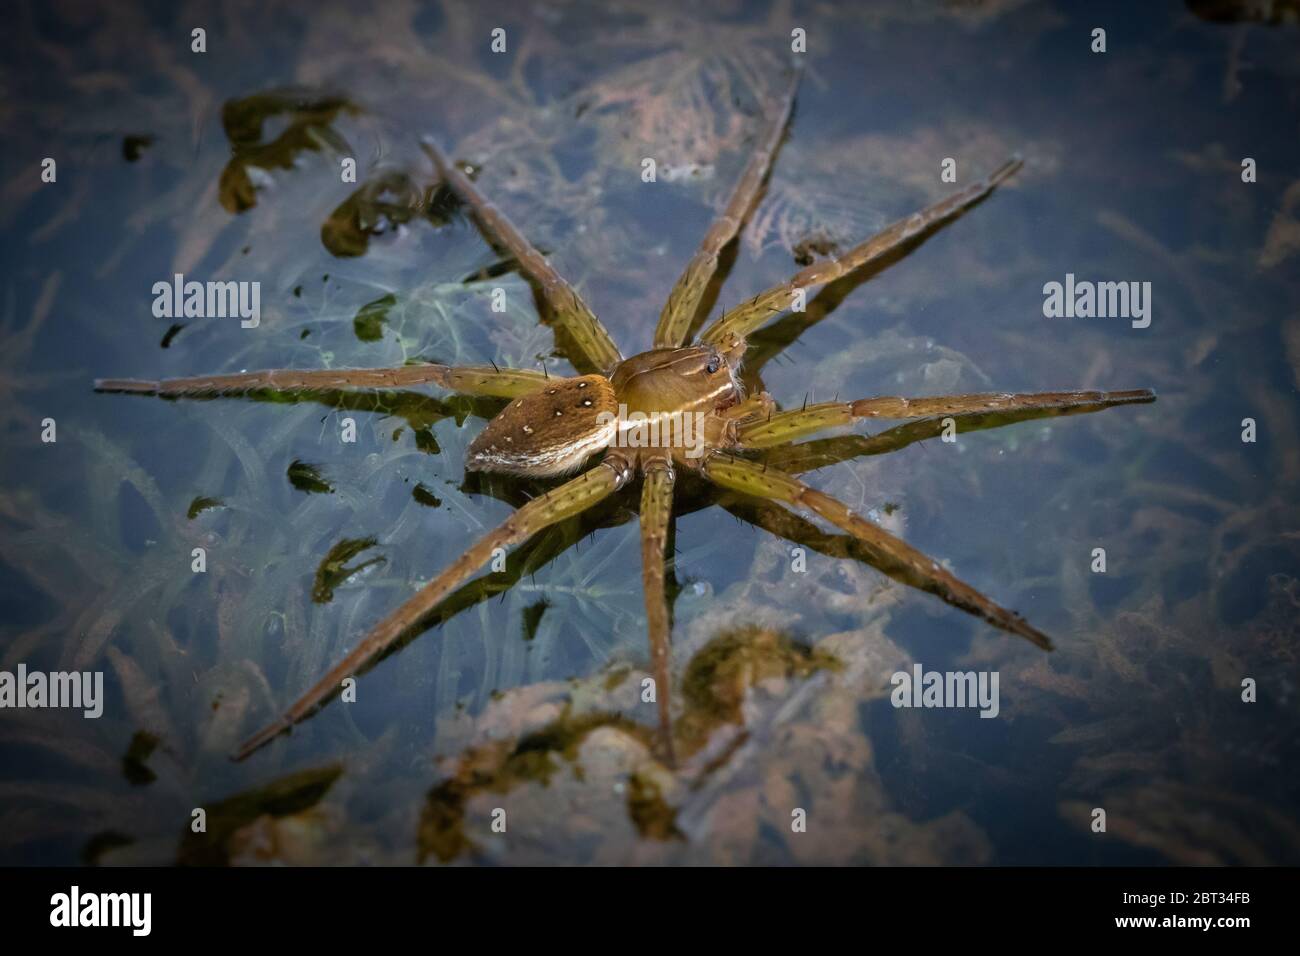 A Raft Spider floats above algae and pond cabbage awaiting its next victim Stock Photo